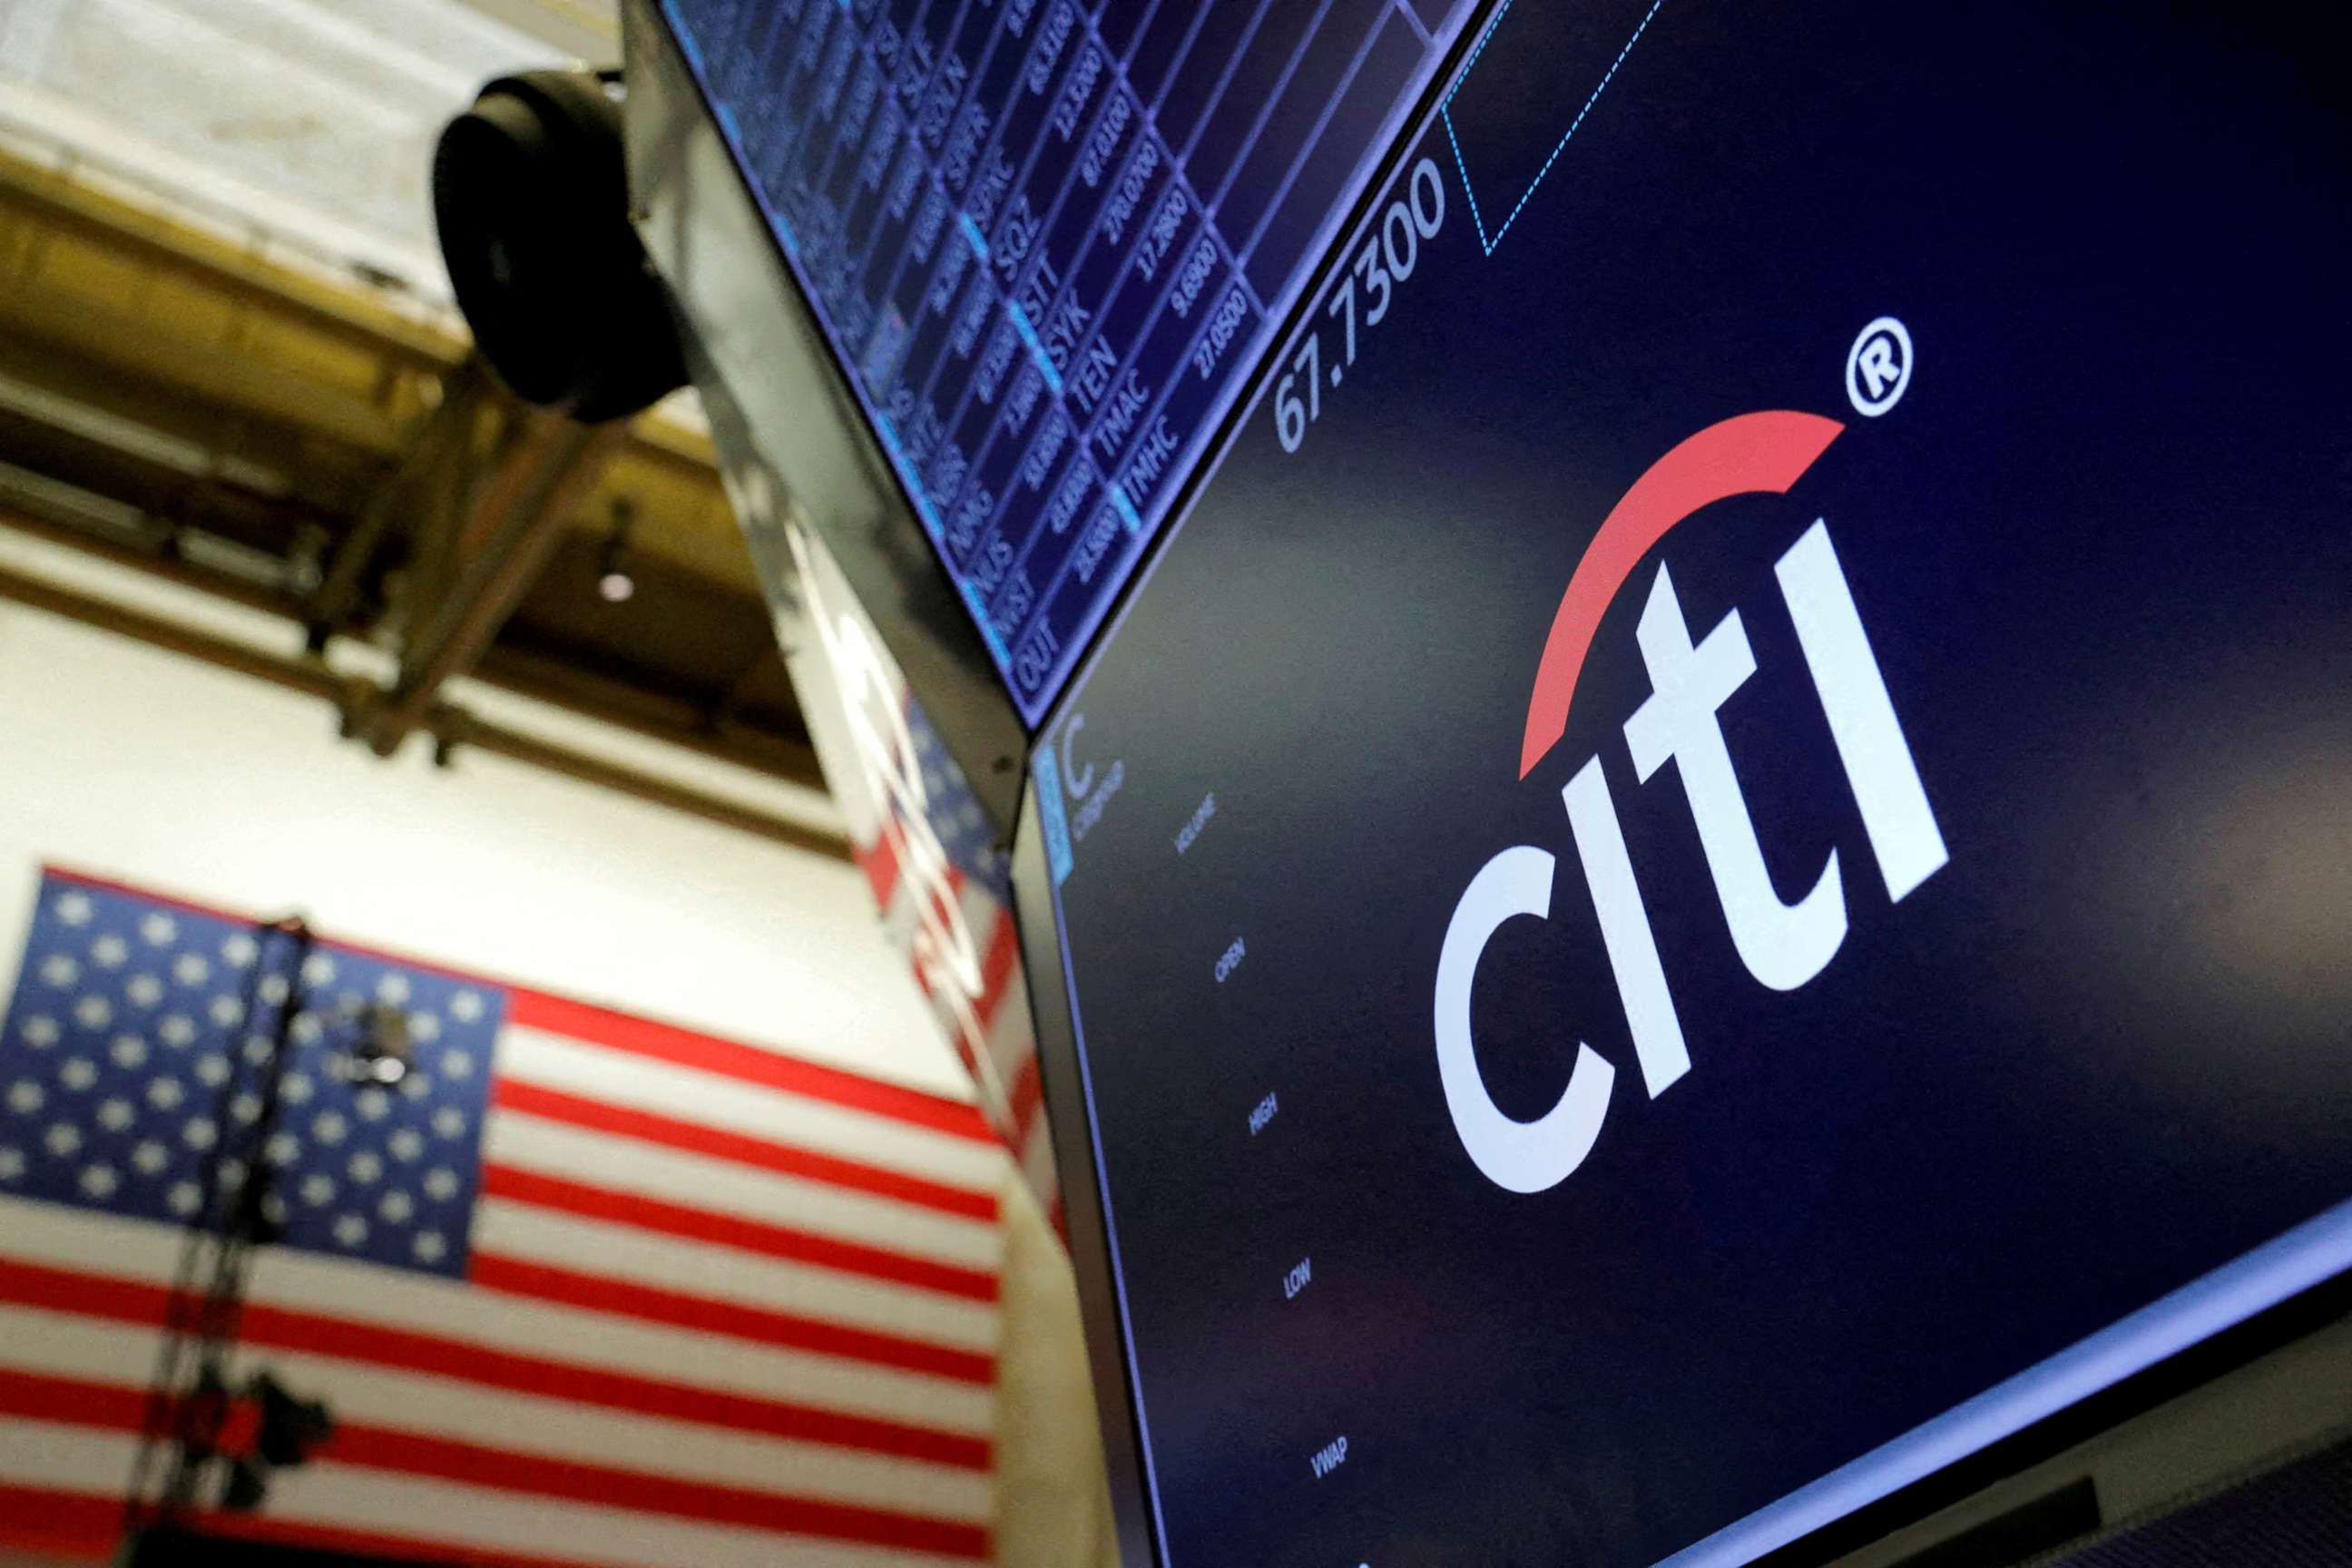 PHOTO: The logo for Citibank is seen on the trading floor at the New York Stock Exchange in New York, Aug. 3, 2021.